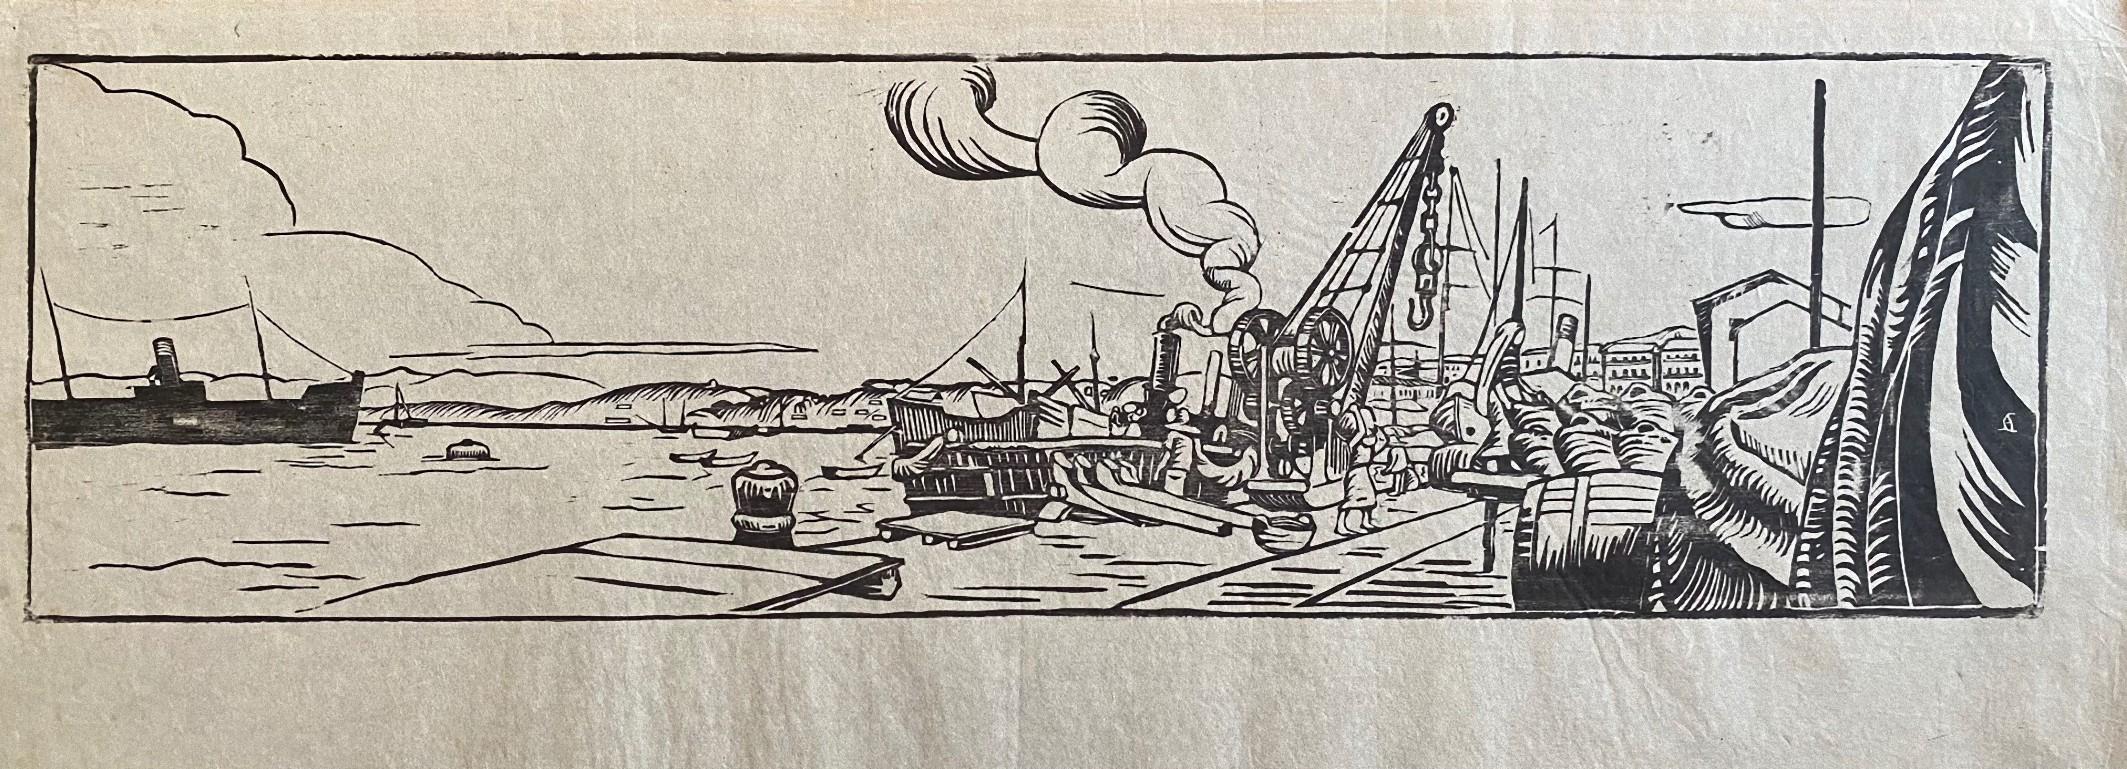 In The Port - Original Woodcut - Early 20th Century